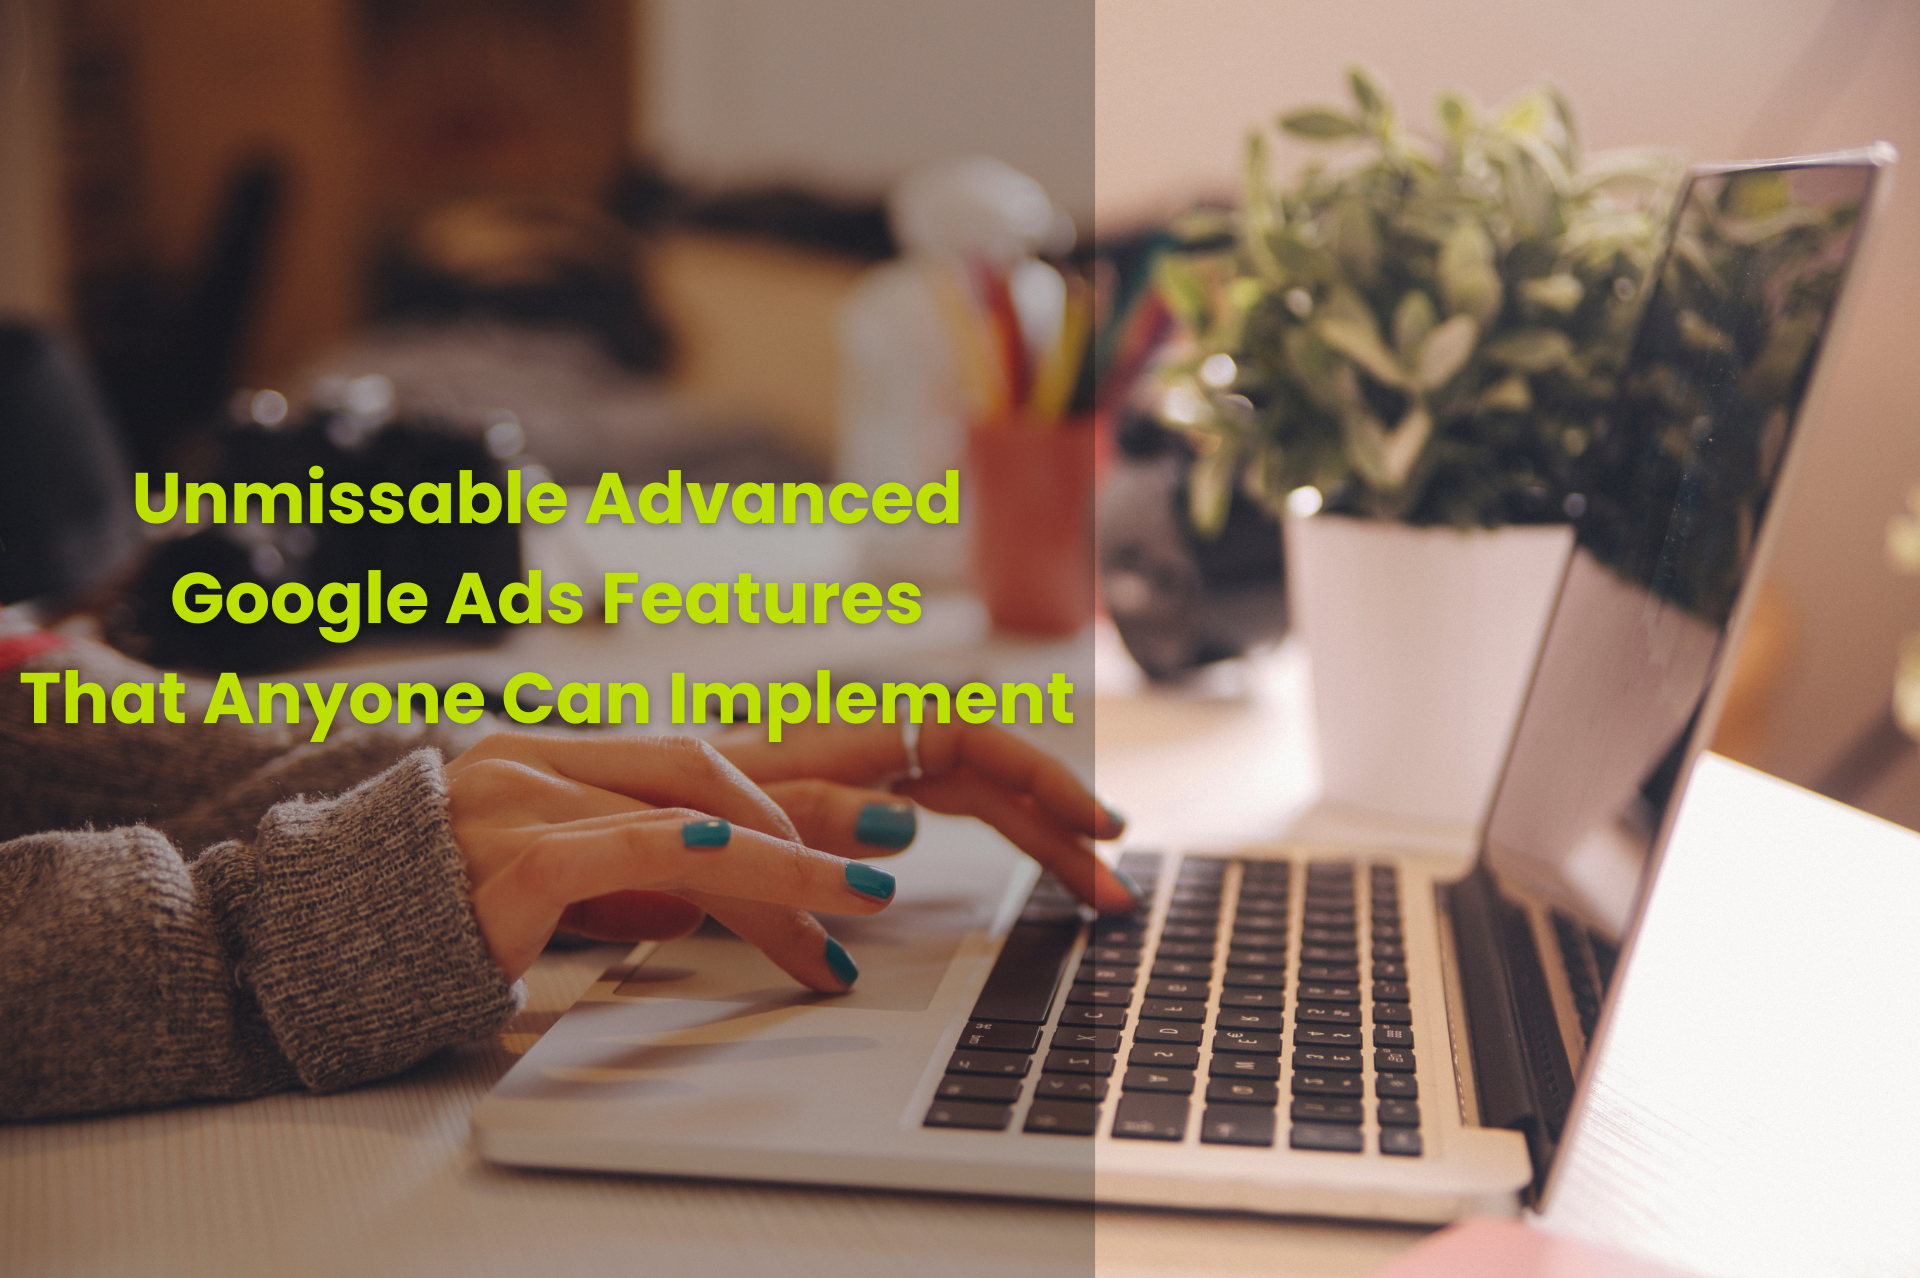 Unmissable Advanced Google Ads Features That Anyone Can Implement